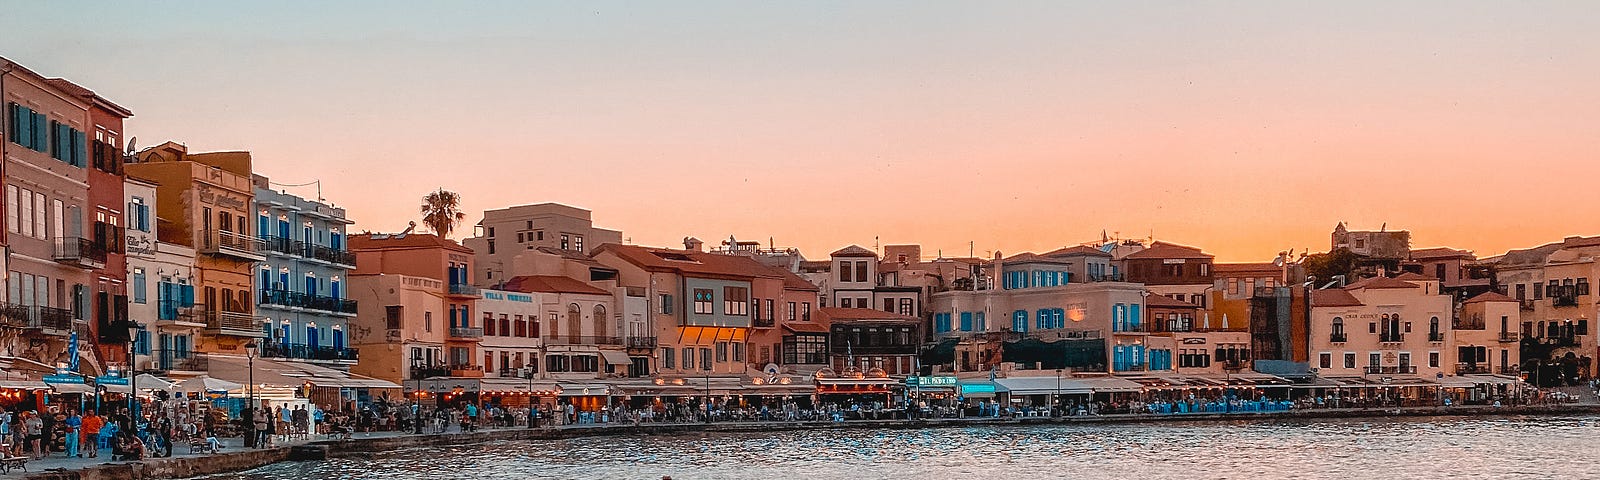 Chania, a town on the Greek island of Crete